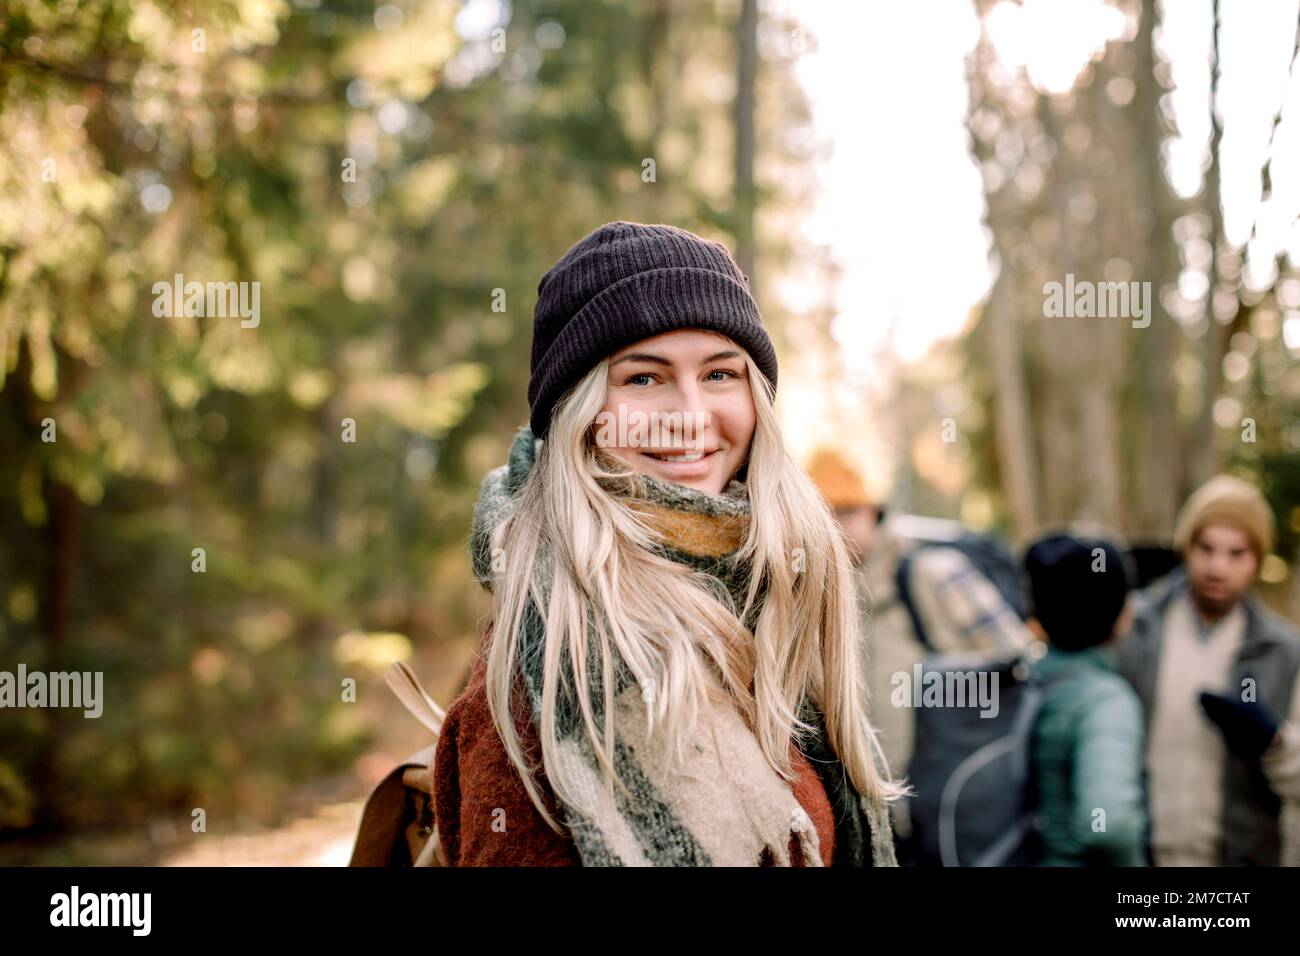 Side view of smiling young woman with blond hair Stock Photo